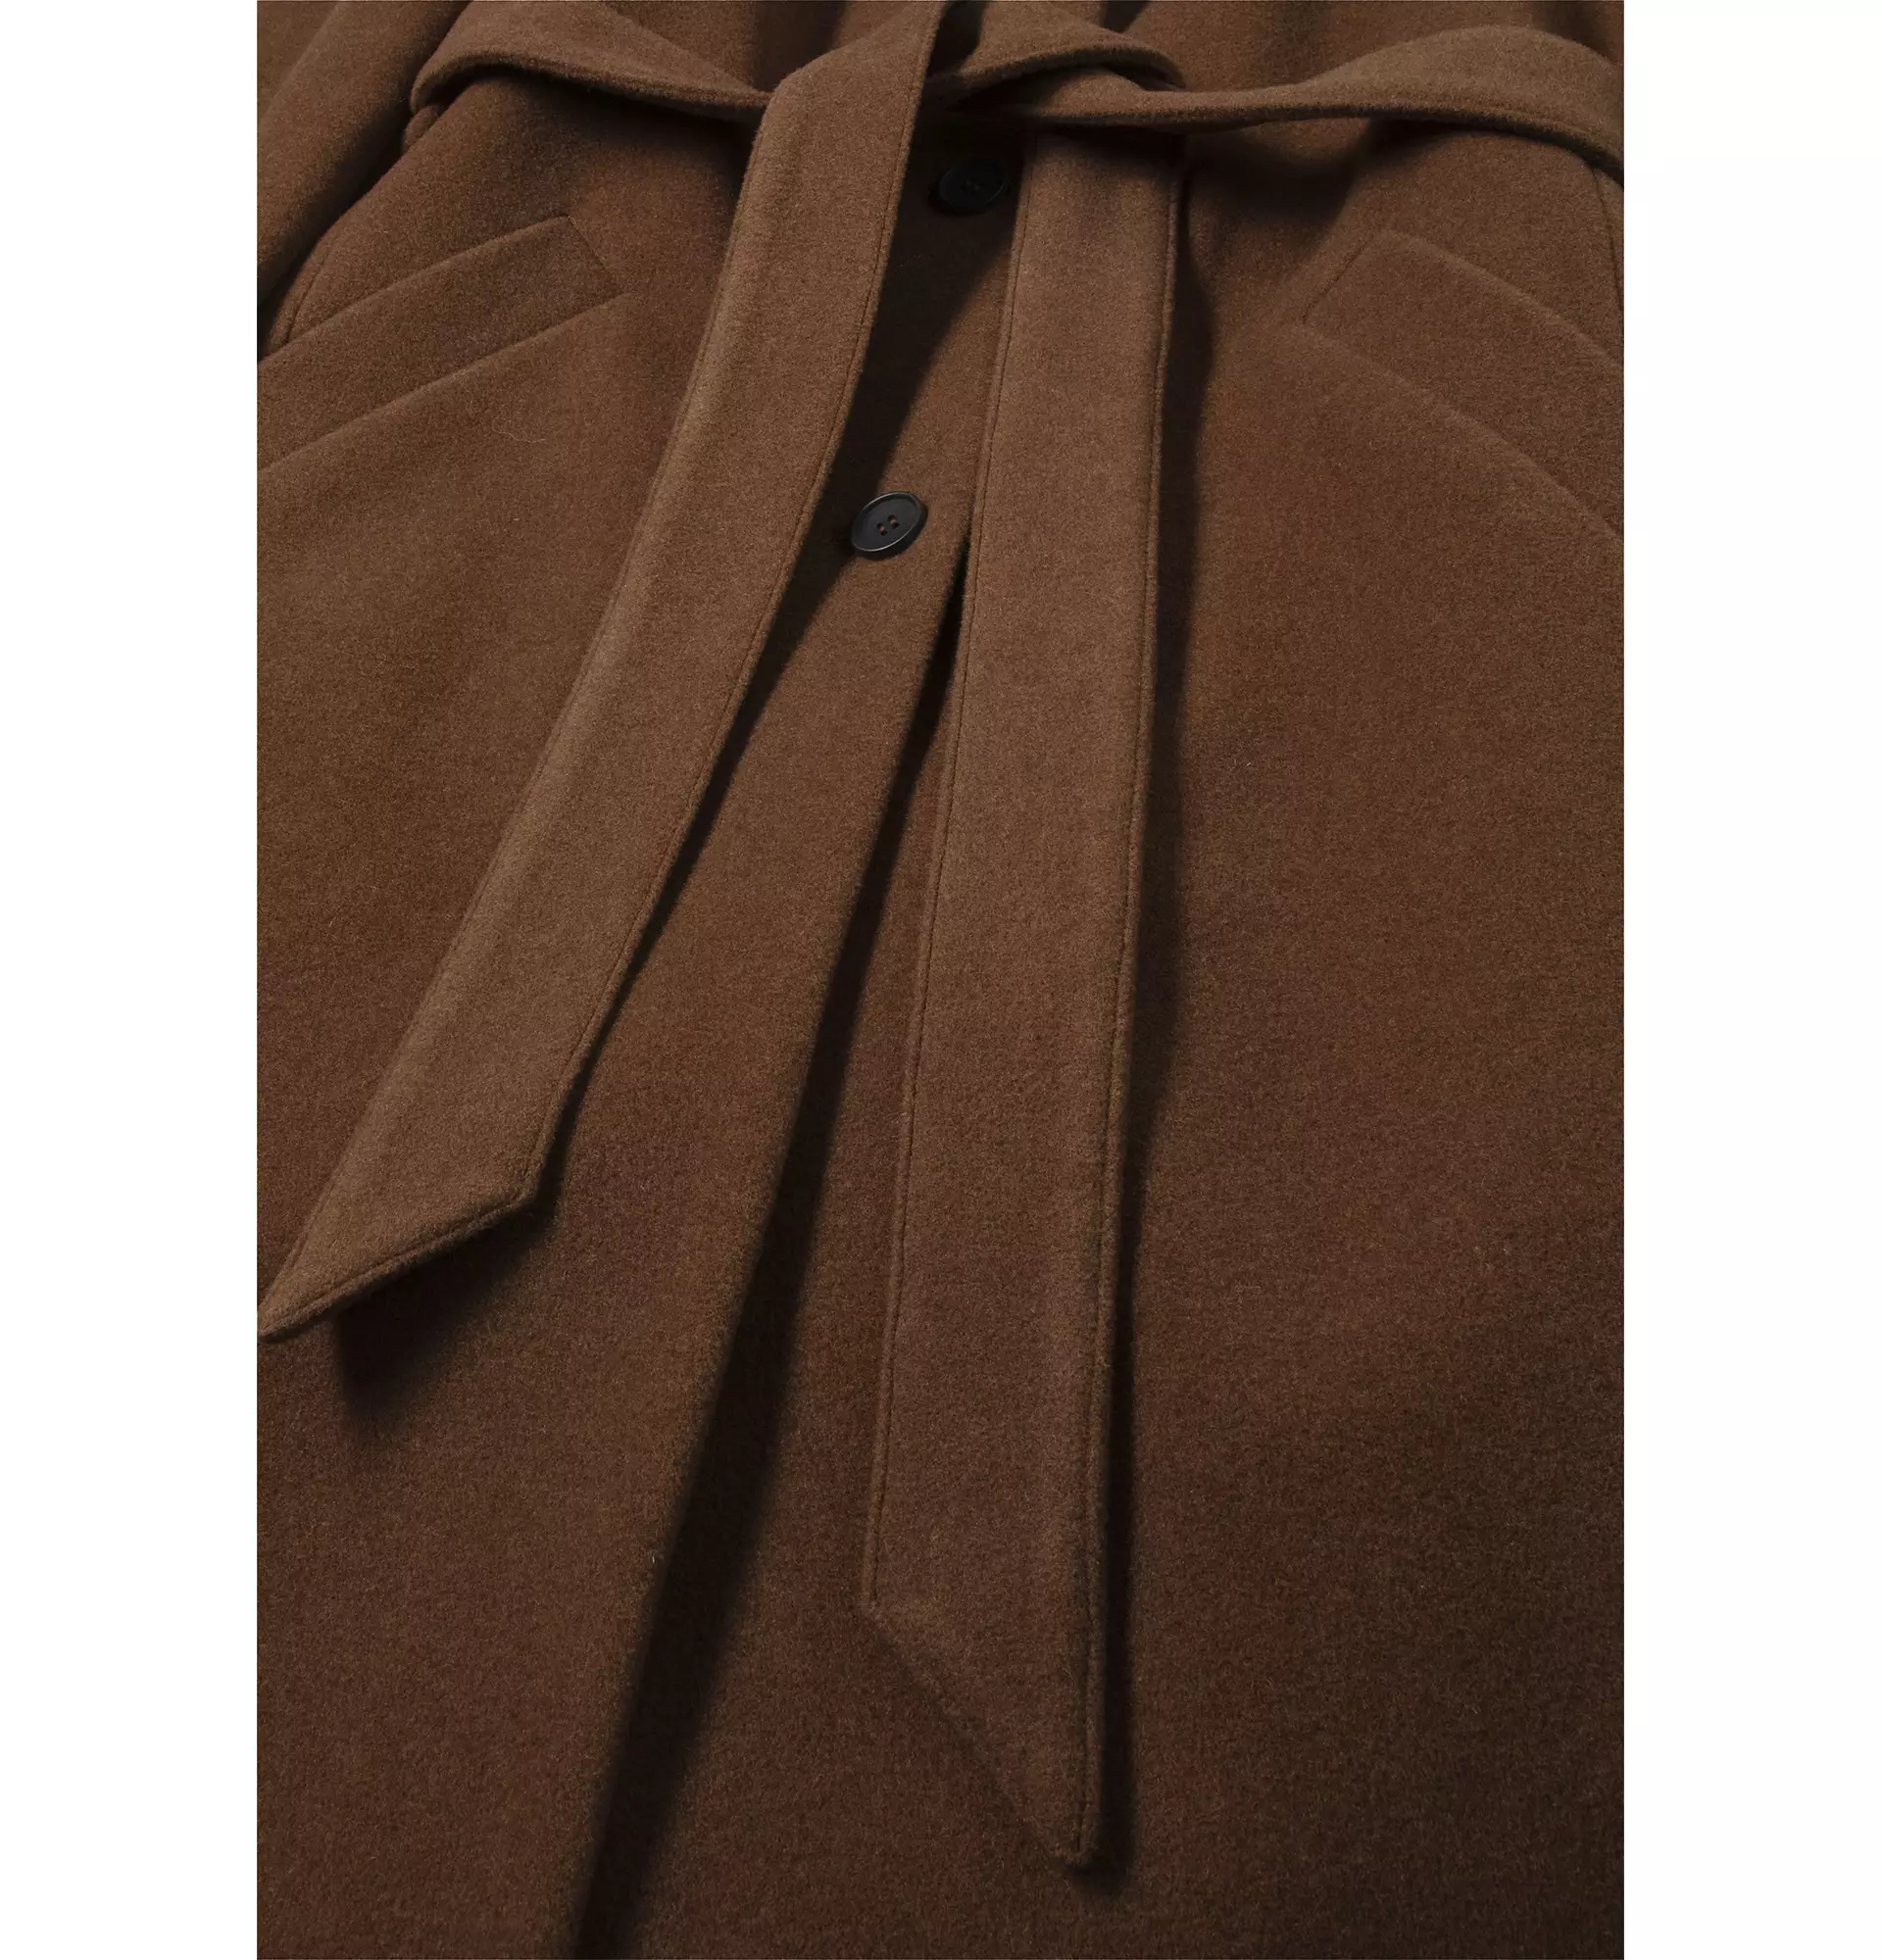 Relaxed wool coat made from pure organic merino wool - 5